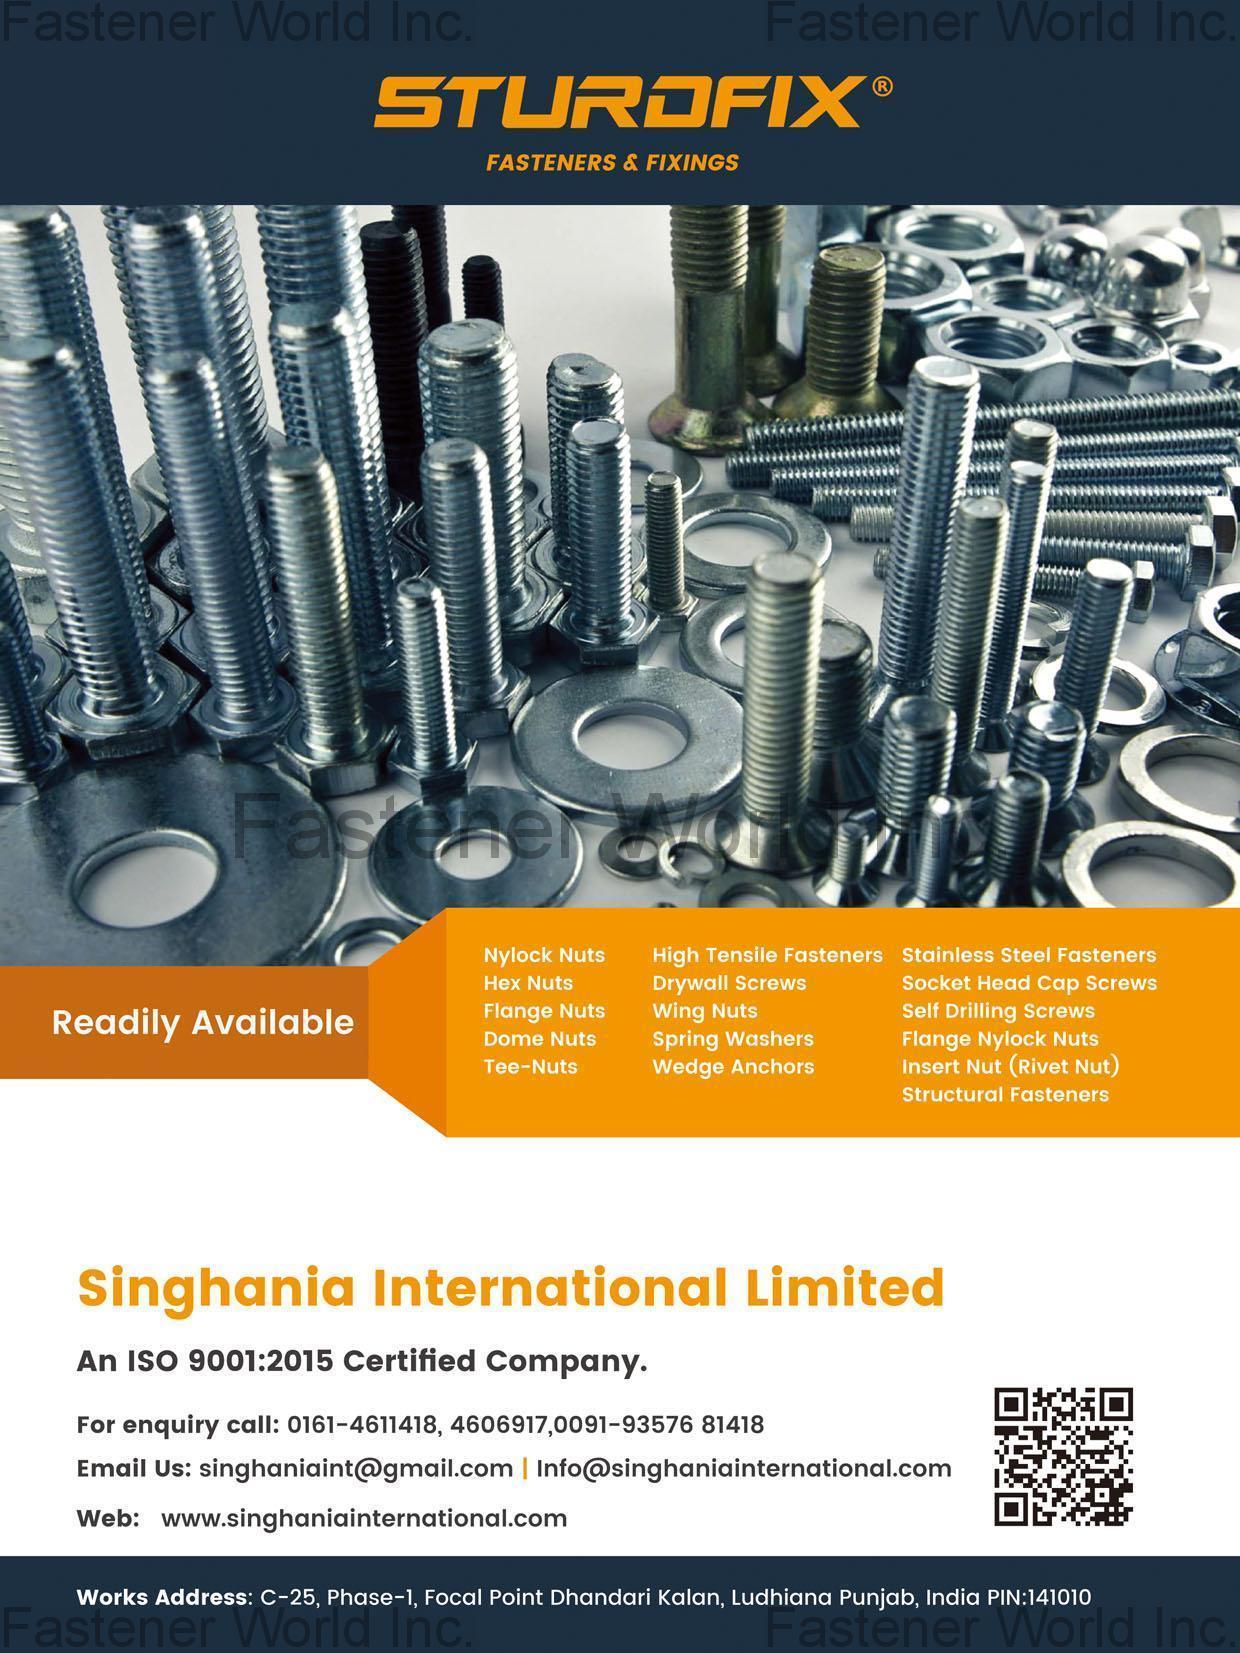 Singhania International Limited (Sturdfix) , Structural Fasteners, Nylock Nuts, Hex Nuts, Flange Nuts, Dome Nuts, Tee-Nuts, High Tensile Fasteners, Drywall Screws, Wing Nuts, Spring Washers, Wedge Anchors, Stainless Steel Fasteners, Socket Head Cap Screws, Self Drilling Screws, Insert Nuts (Rivet Nuts) , Structural Bolts